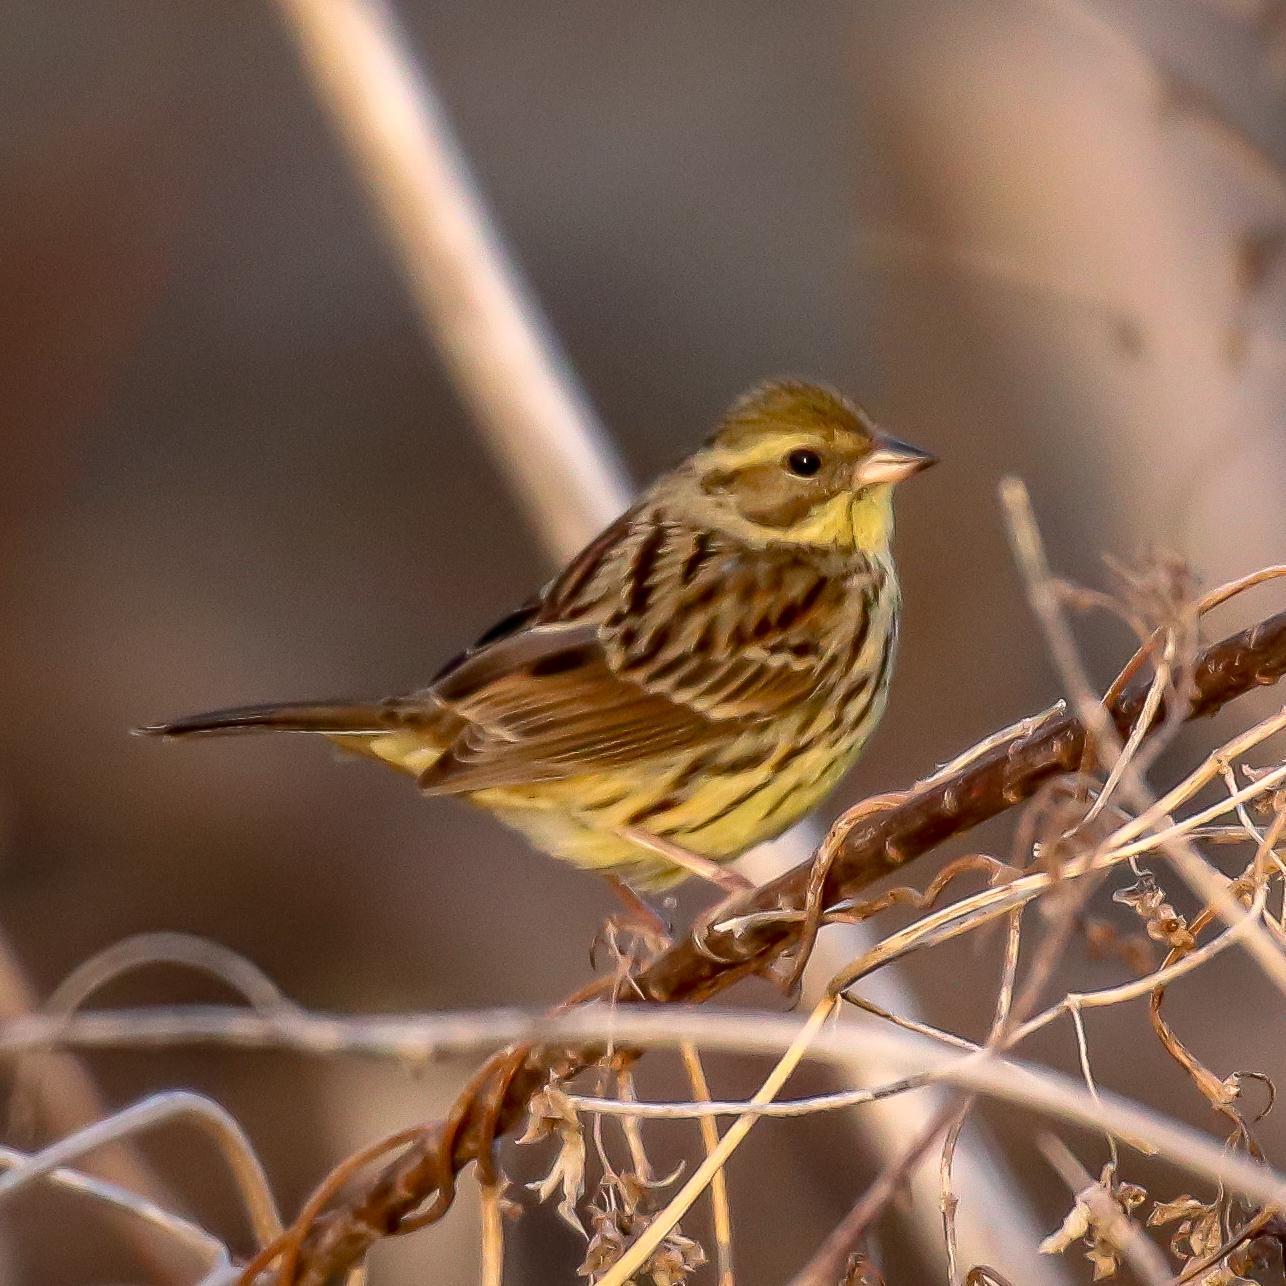 Black-faced Bunting Photo by Kevin Moore